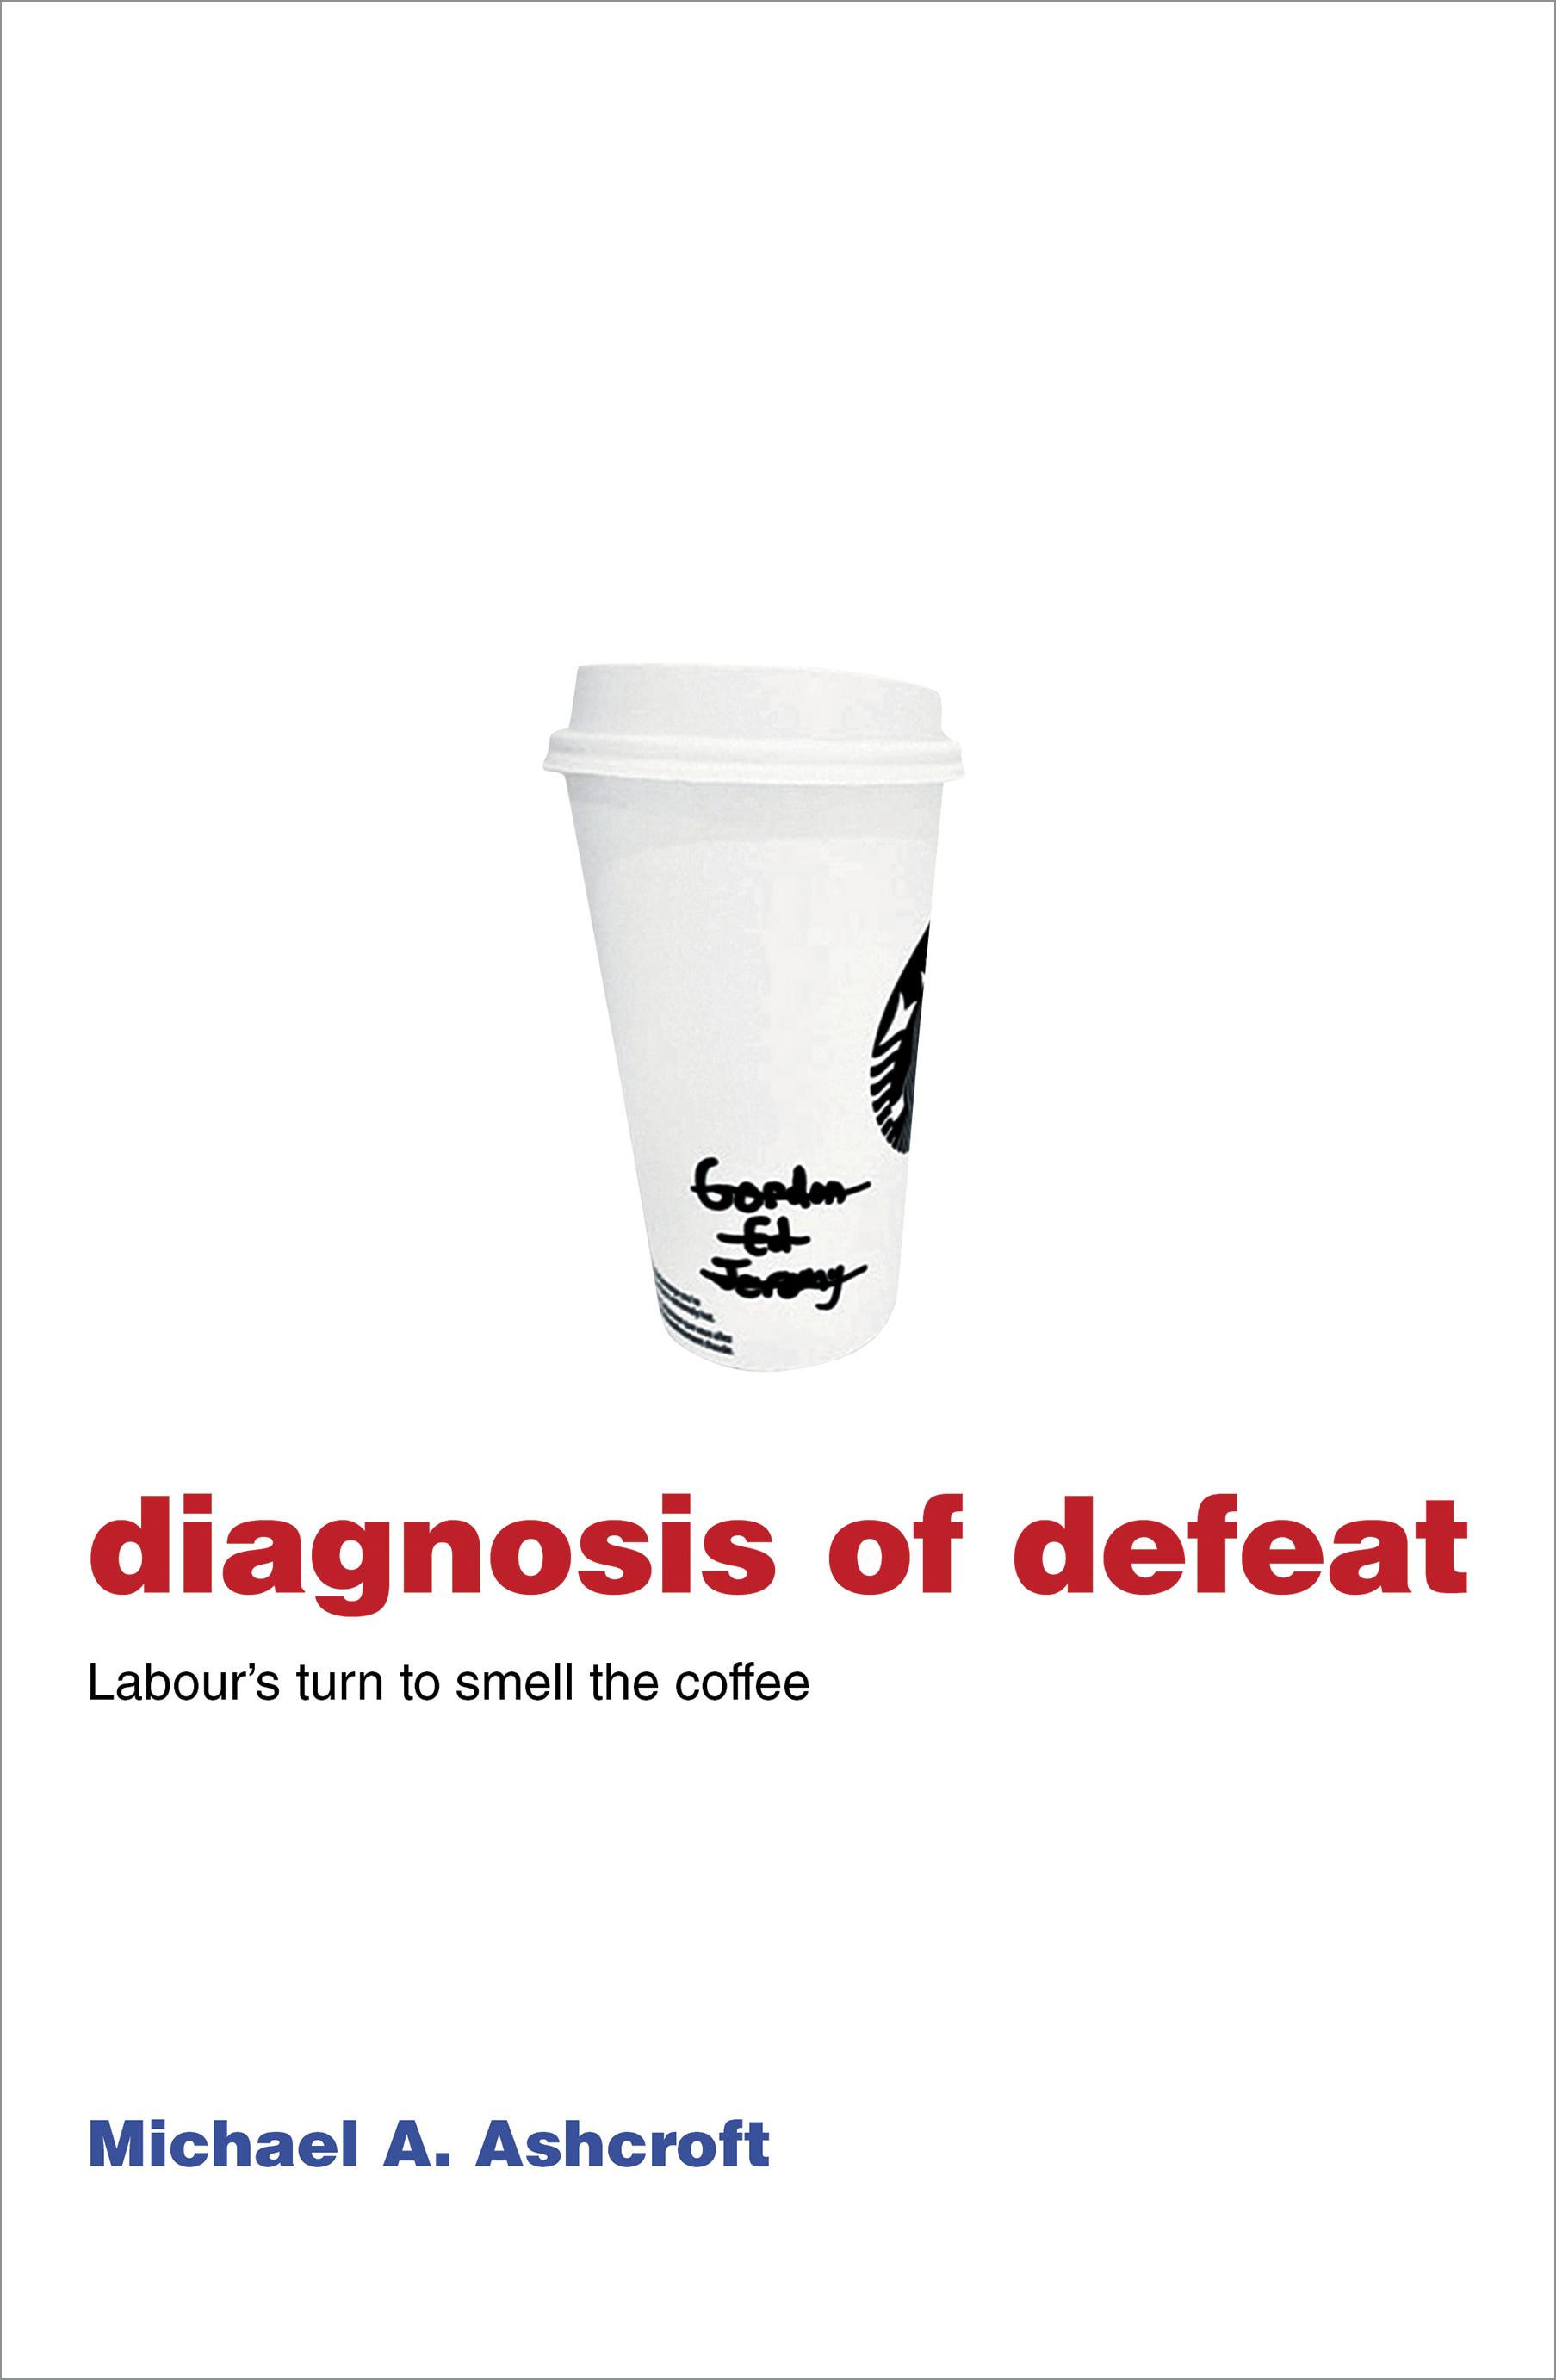 Diagnosis of Defeat